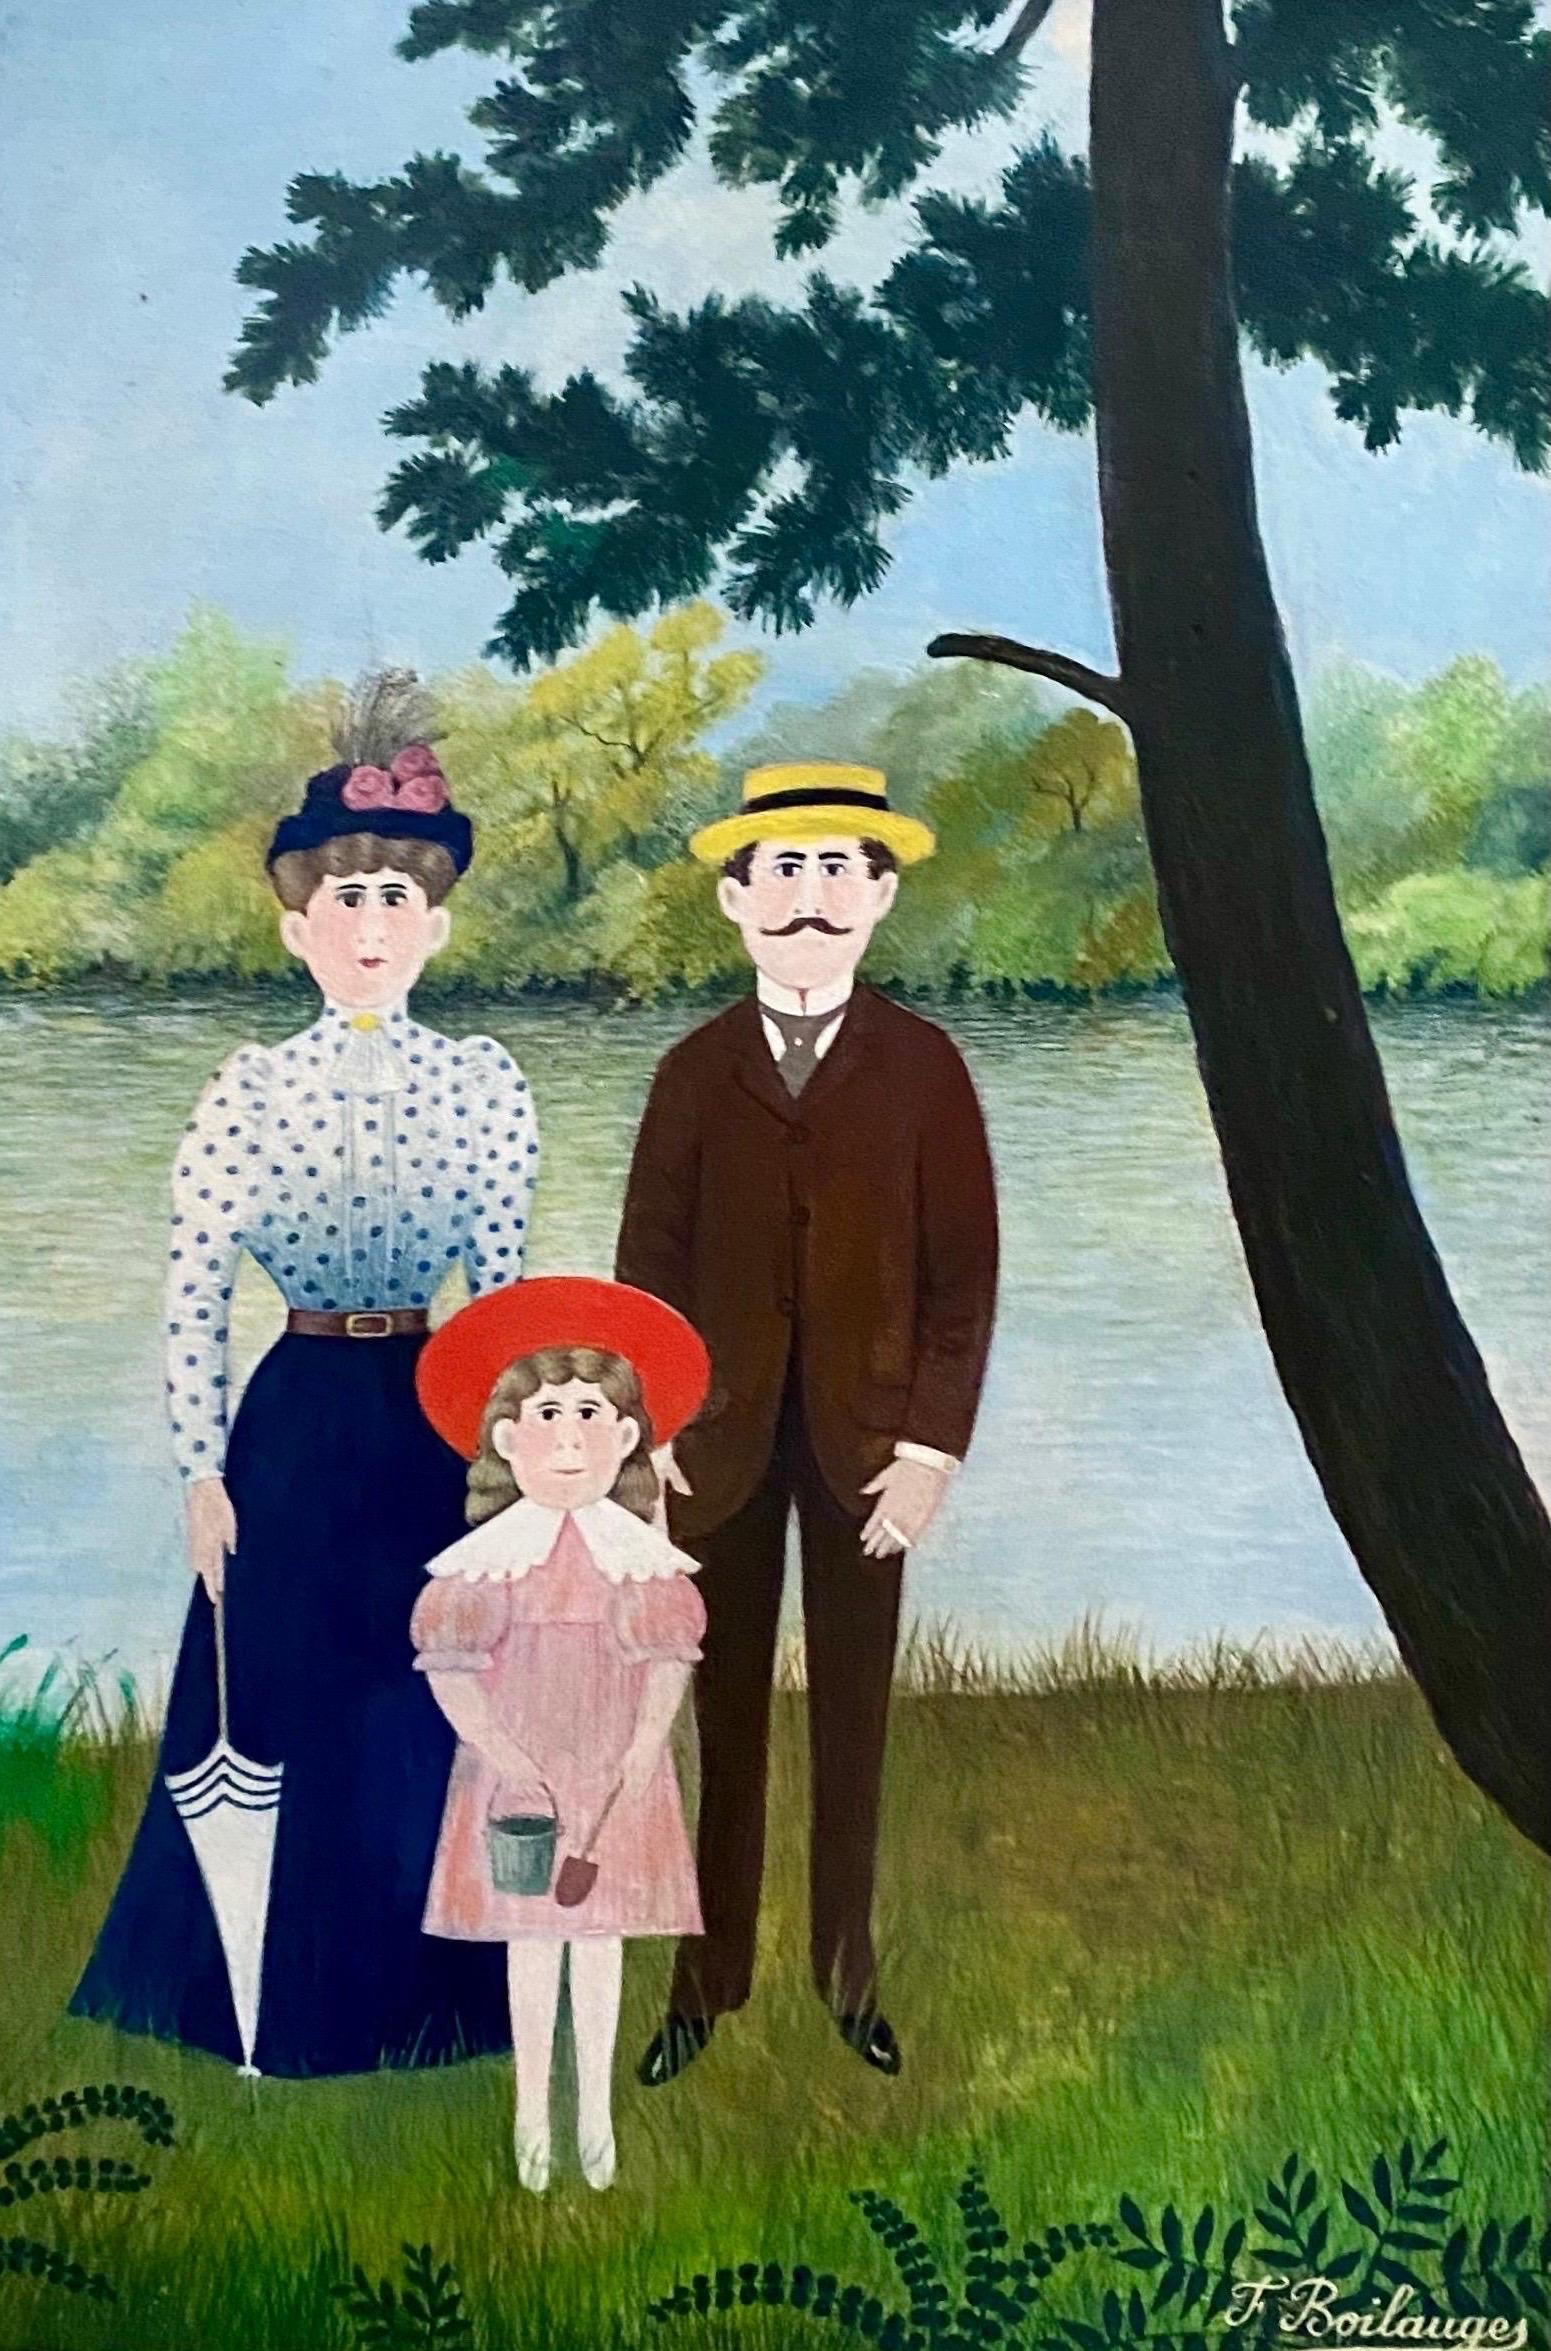 French Folk Art, Naive, Primitive, Oil Painting "Family Outing" F. Boilauges